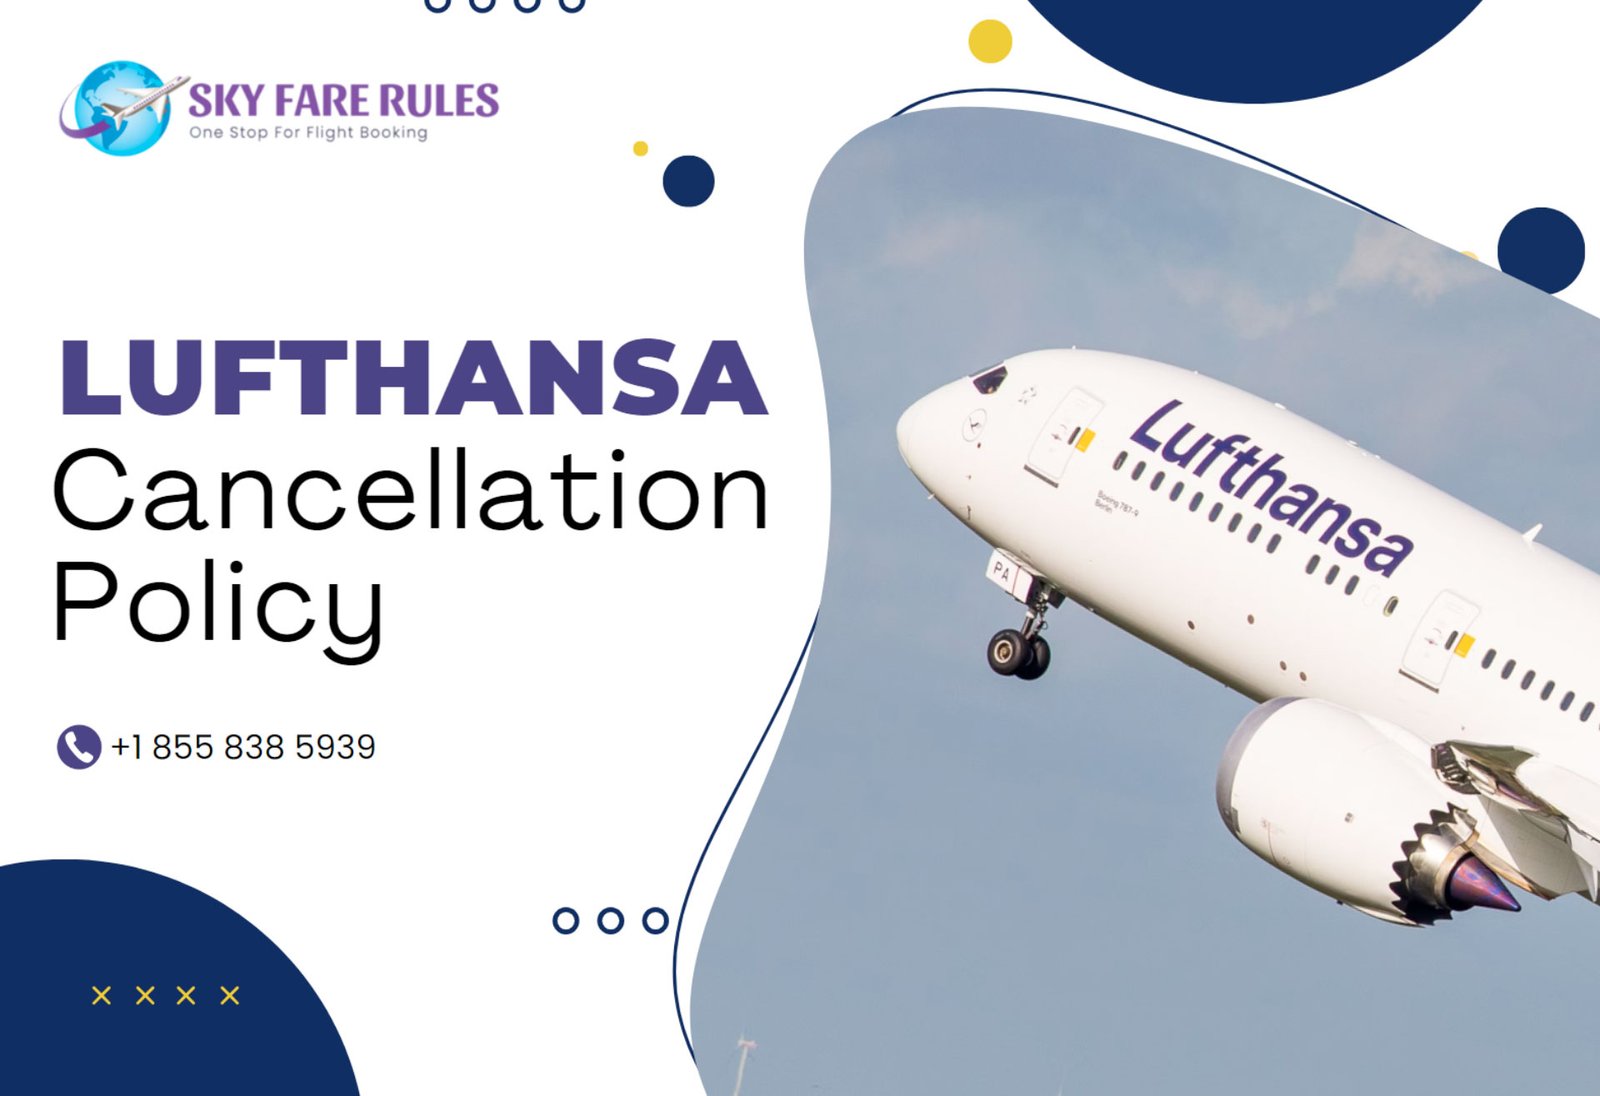 Lufthansa Cancellation Policy - Sky Fare Rules